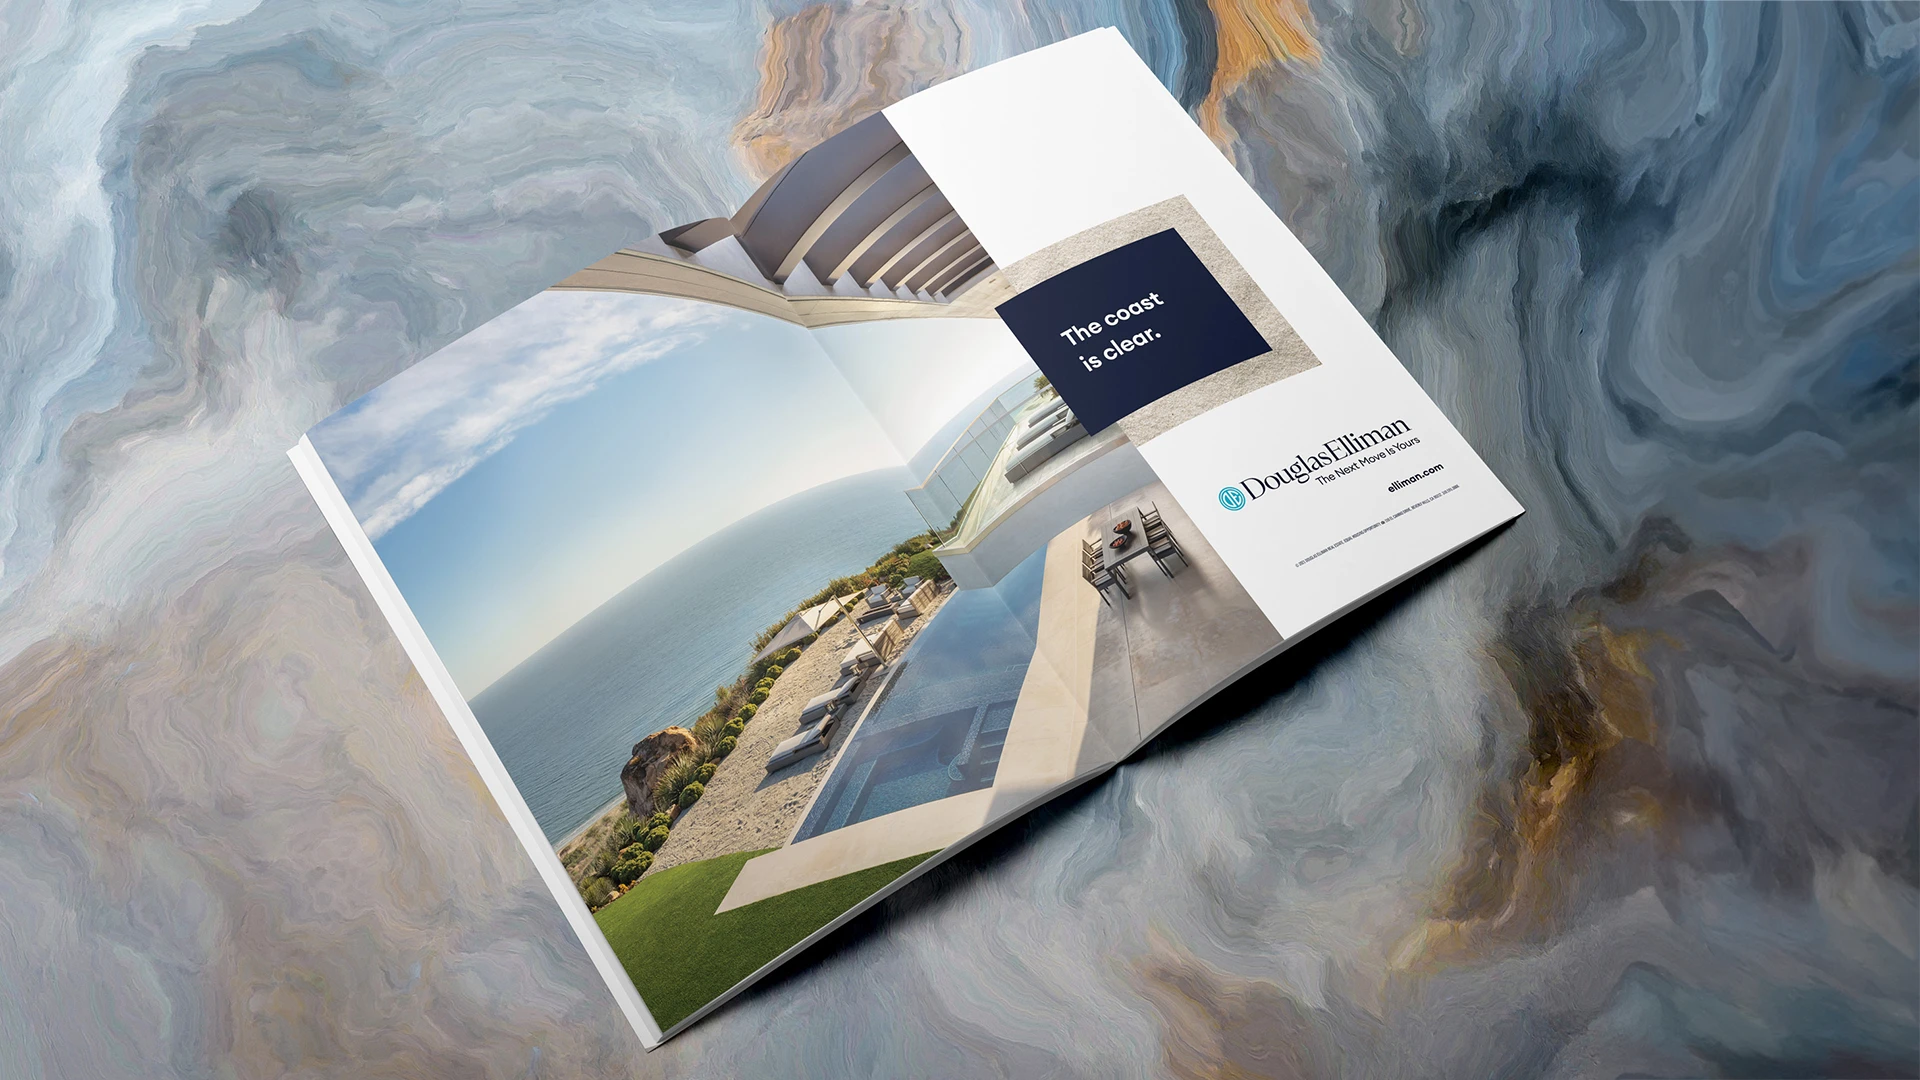 Douglas Elliman campaign advertising of an anonymous property, using clever wording. The image is of a property with a view of an infinite-edge pool matching the horizon of the ocean.